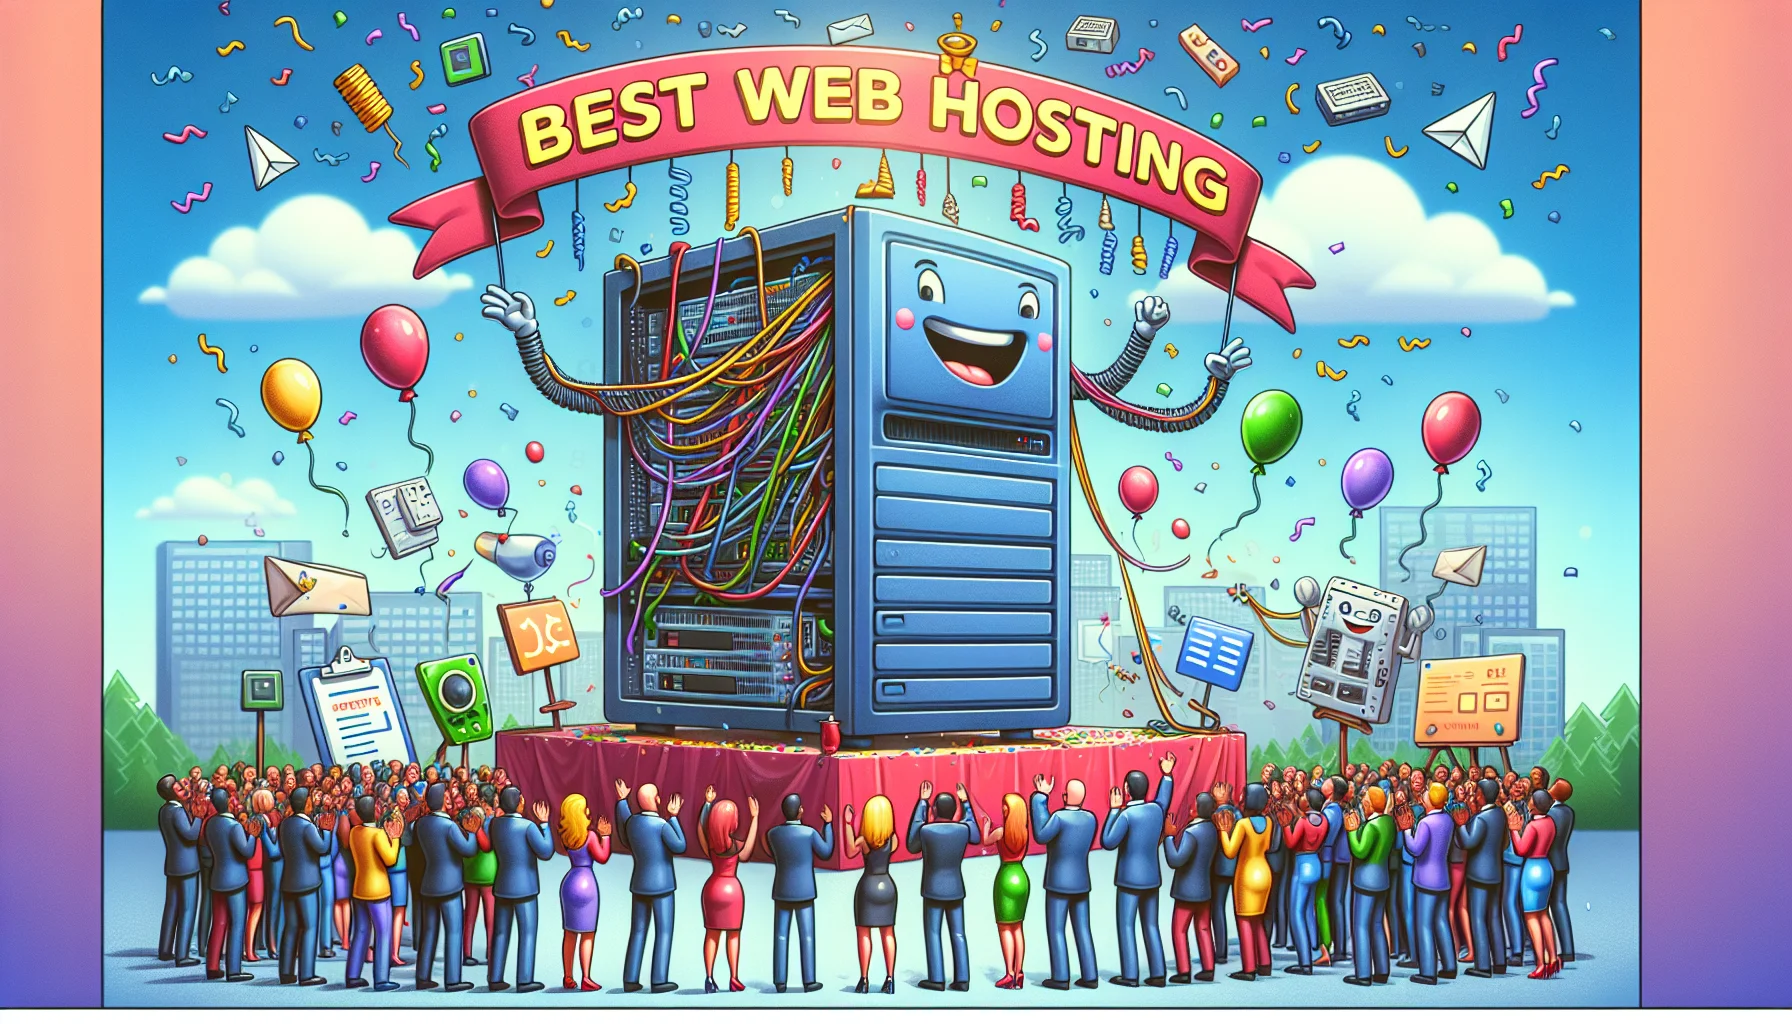 Craft a humorous and enticing image that is suggestive of an event run by a well-known web hosting platform. The scene features a giant computer tower, personified with a friendly face, orchestrating a gala of various web tools, plugins, and digital elements. A festive banner hangs high above the central computer panel stating 'Best Web Hosting' and balloons and confetti floating through the cybernetic air. A line of web icons presents scripts, bouncing like giddy performers ready to put on a show. Few individuals from different descents including Caucasian, Black, and South Asian, observed in the scene, express their amazement and satisfaction with the celebration.